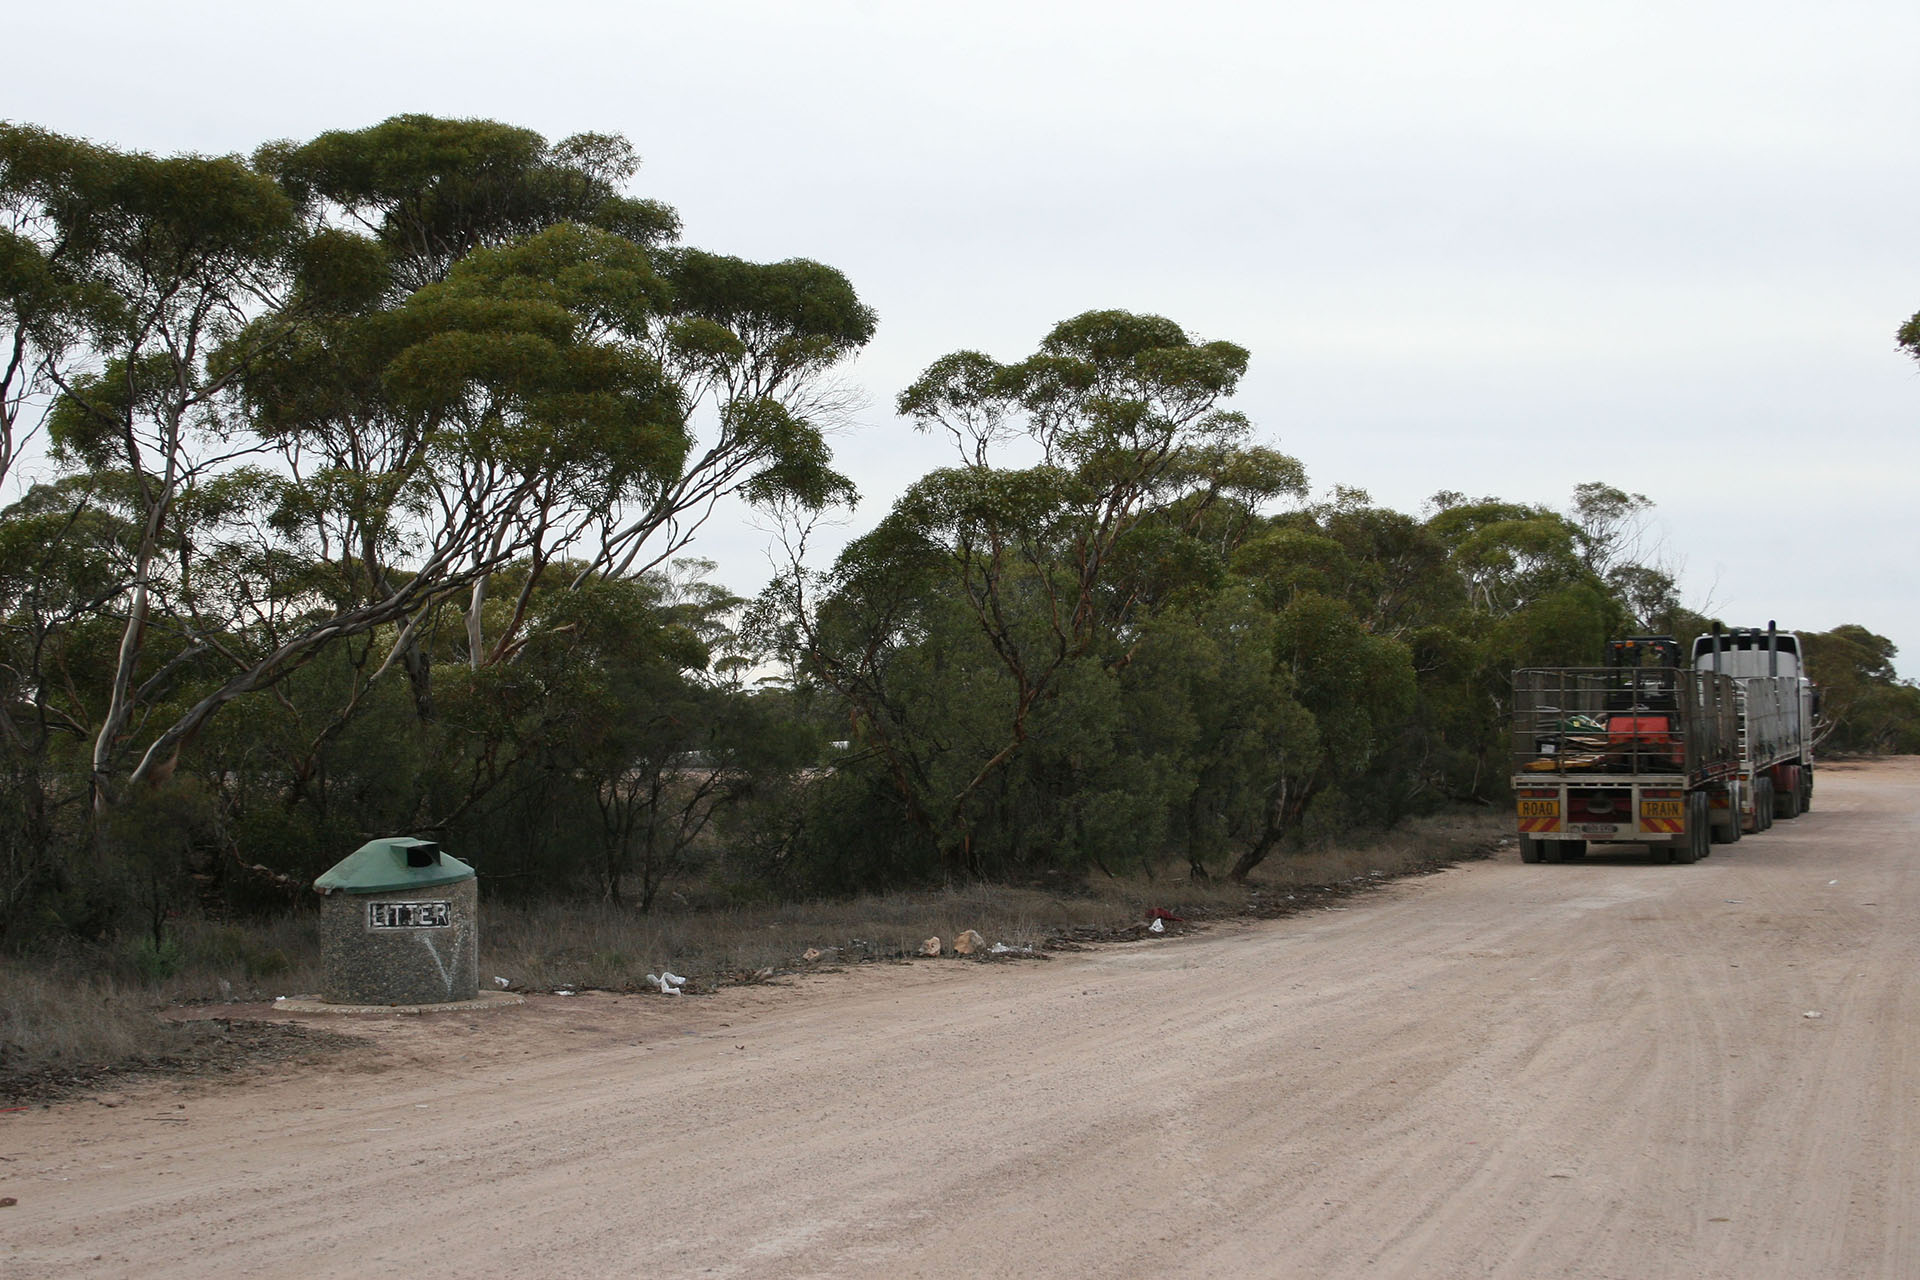 Typical rest area on a South Australian road.